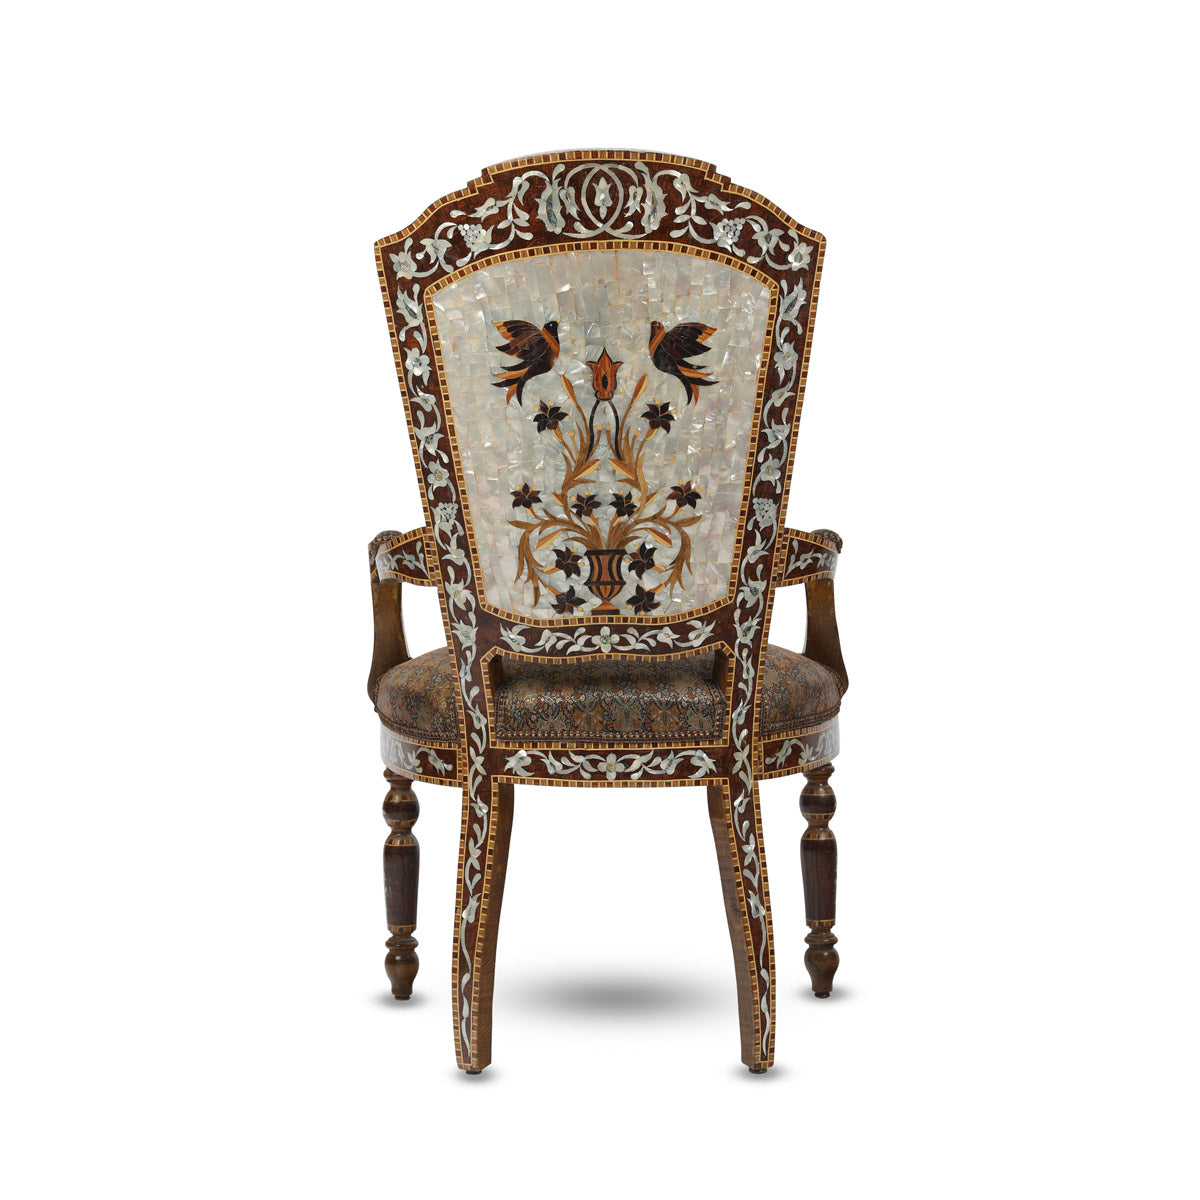 Back View of Wooden Mother of Pearl Inlaid Arabic Armchair